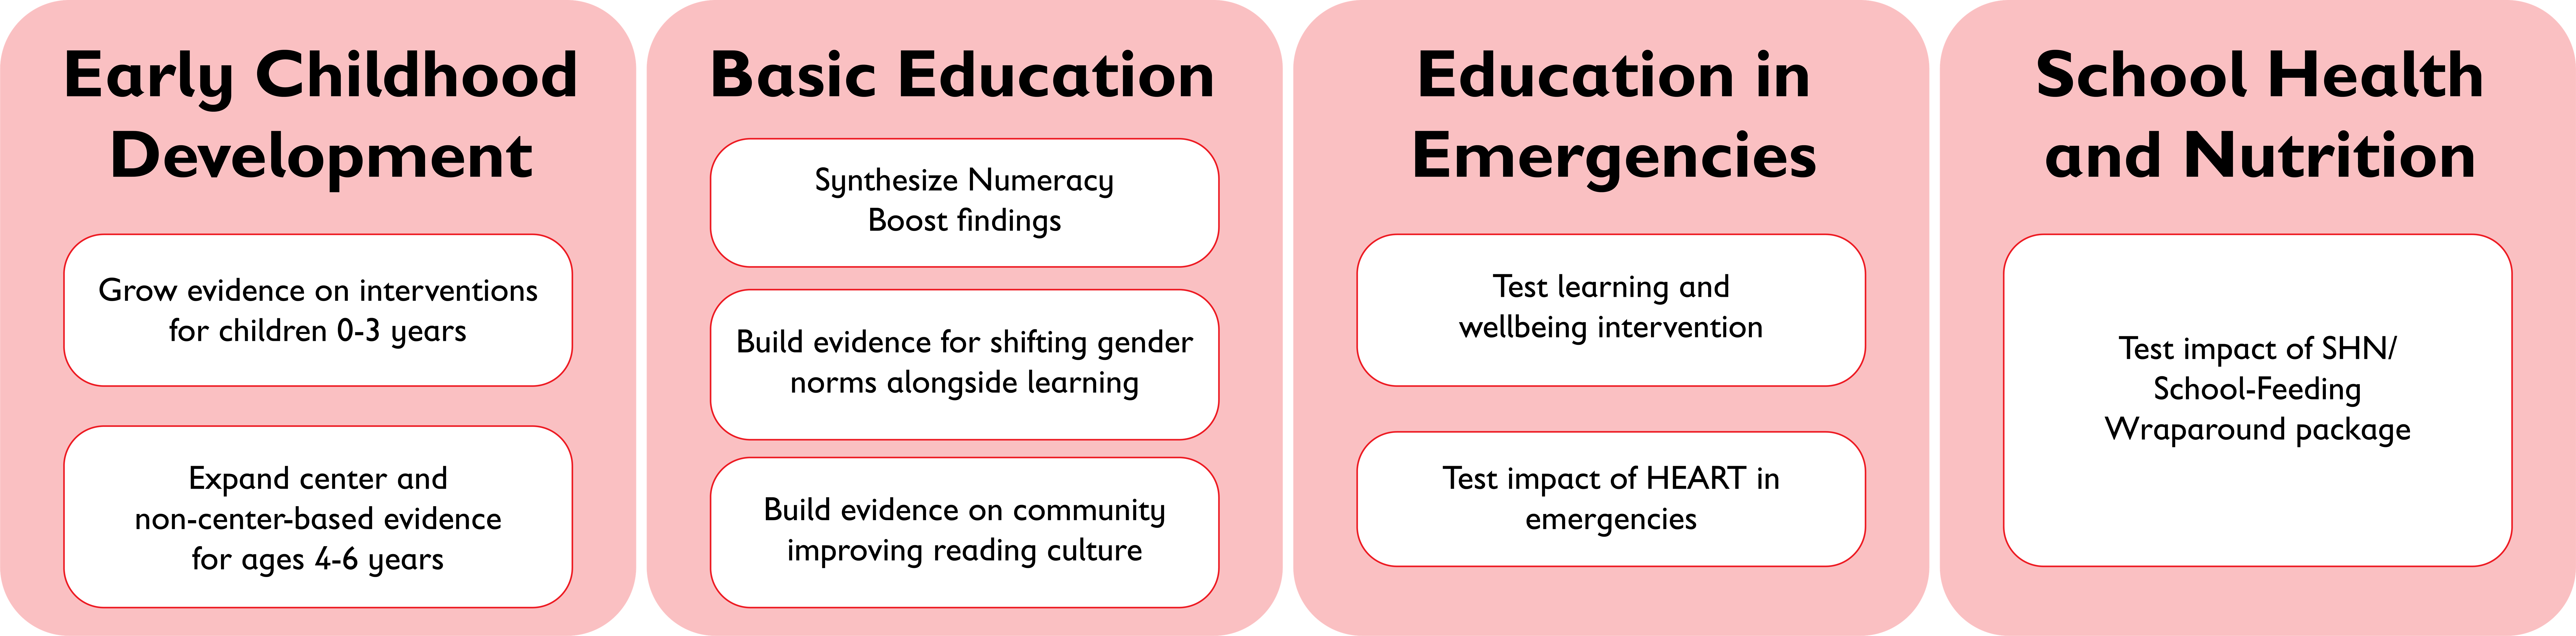 This graphic depicts four areas of programing on our applied research agenda for 2018: Early Childhood Development, Basic Education, Education in Emergencies and School Health and Nutrition. Image credit: Save the Children 2018. 